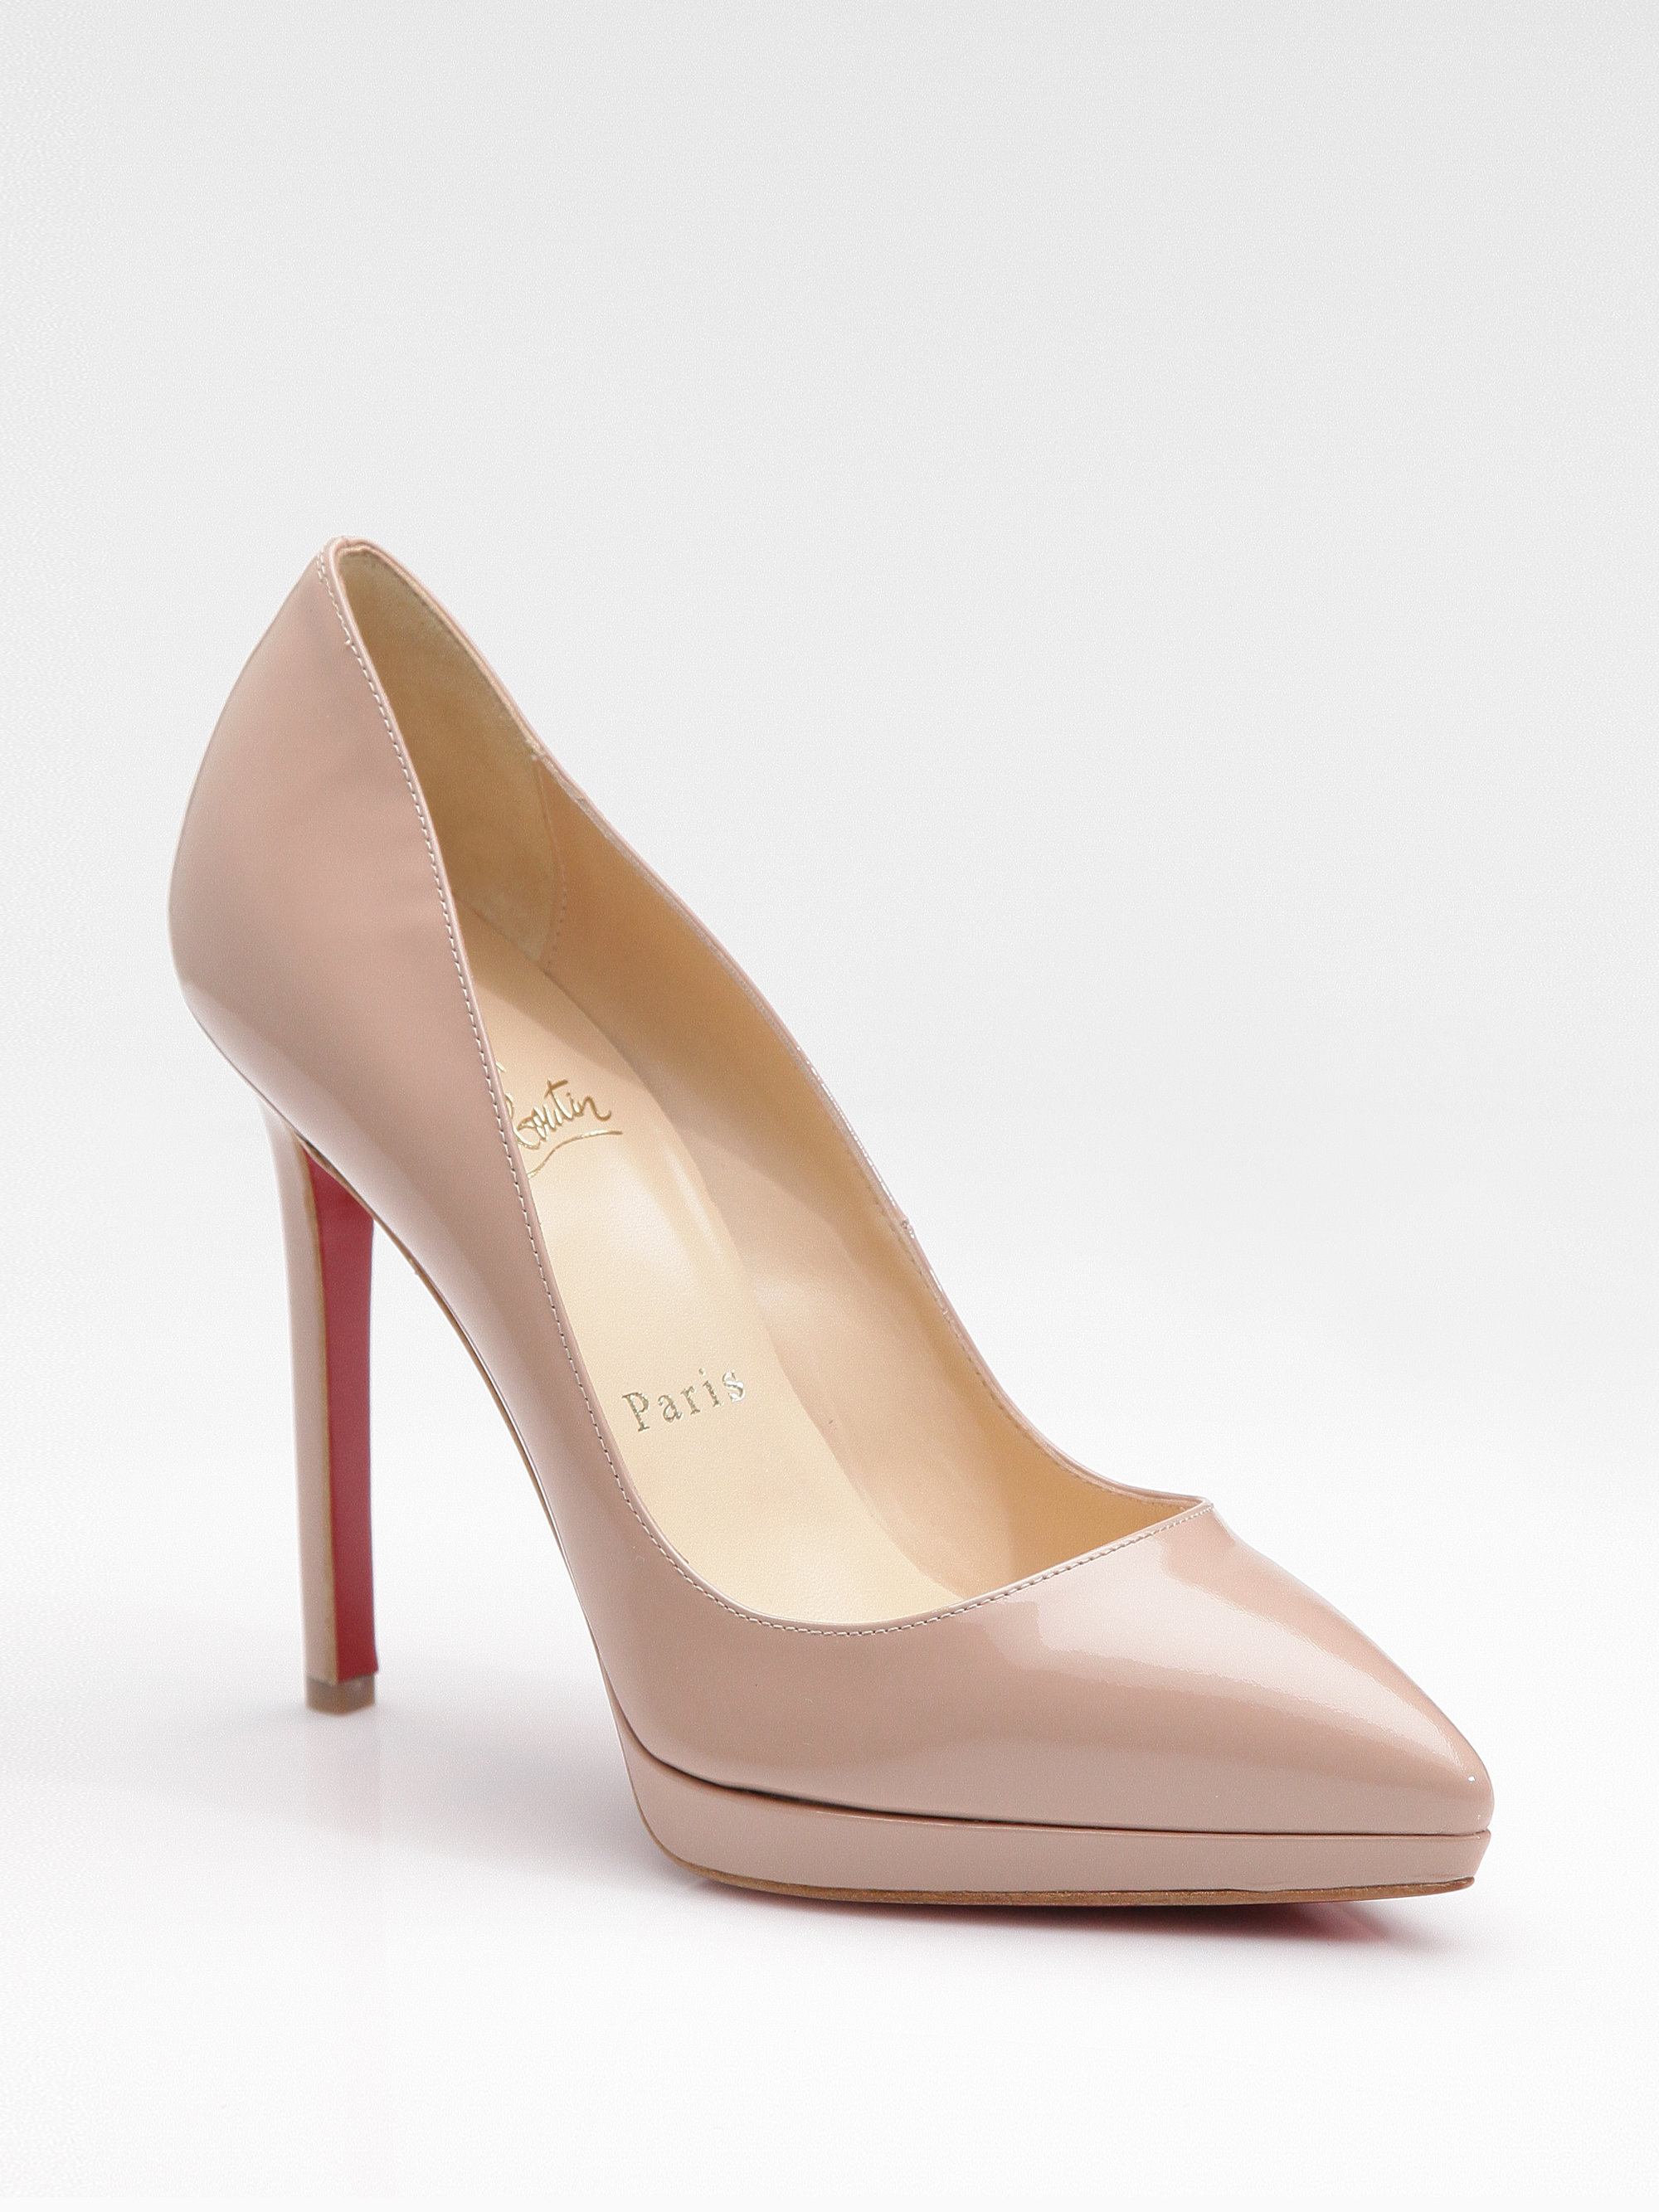 Christian Pigalle Plato 120 Patent Platform Pumps in (Natural) Lyst